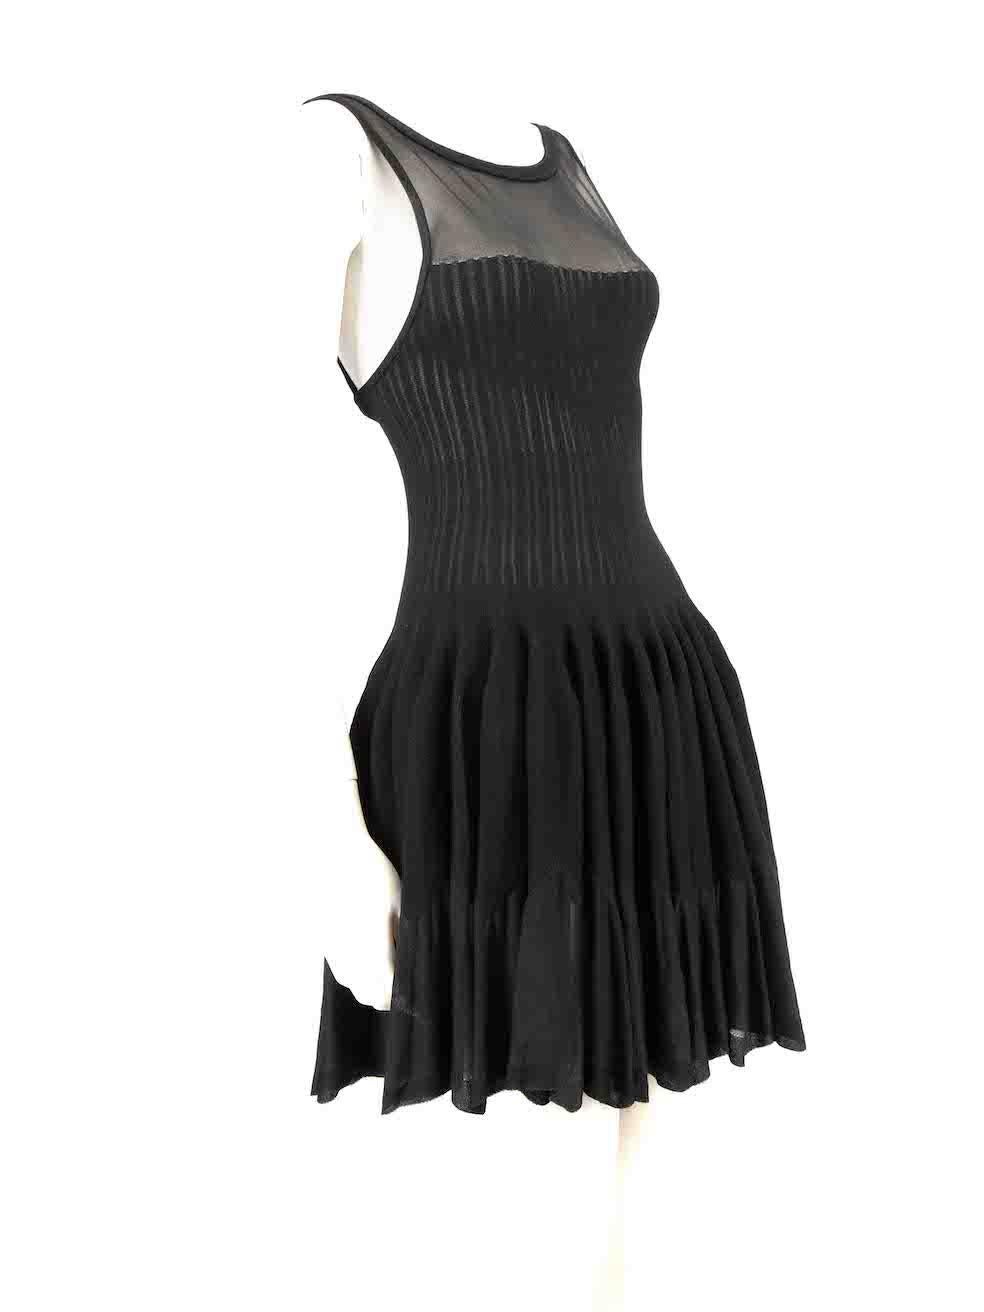 CONDITION is Very good. Minimal wear to dress is evident. Minimal wear to the fabric surface with one or two plucks to the weave found over the shoulders and very lights discolouration seen inside the bodice on this used Alaïa designer resale item.
